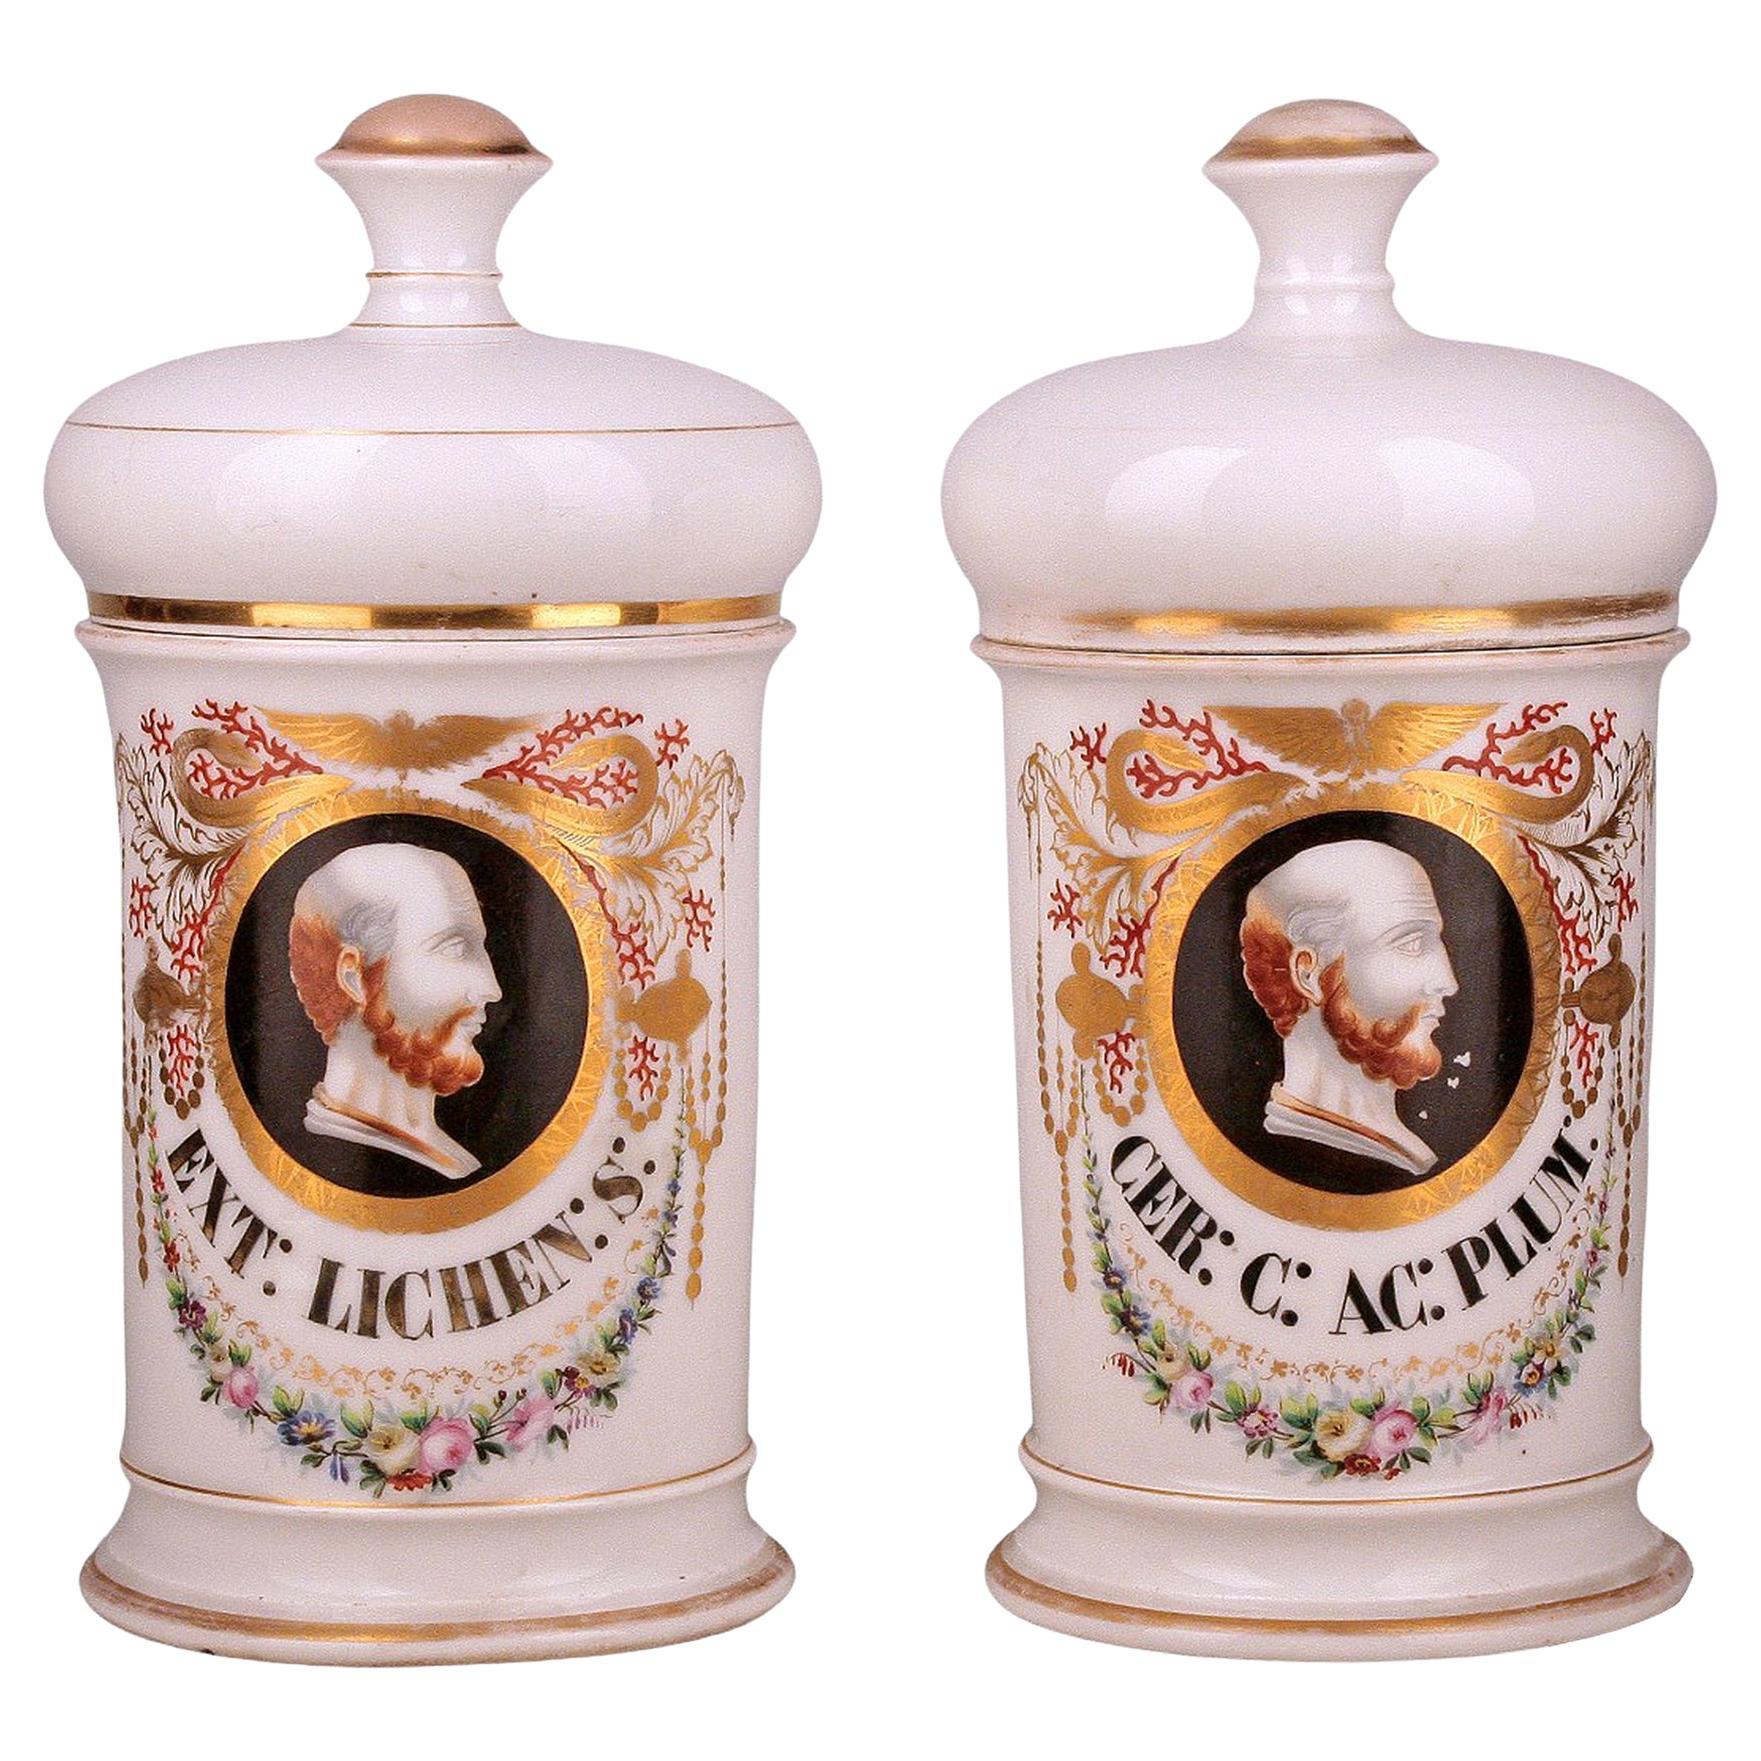 Set of Neoclassical Glazed Porcelain Apothecary/Pharmacy Jars Signed by Langlois